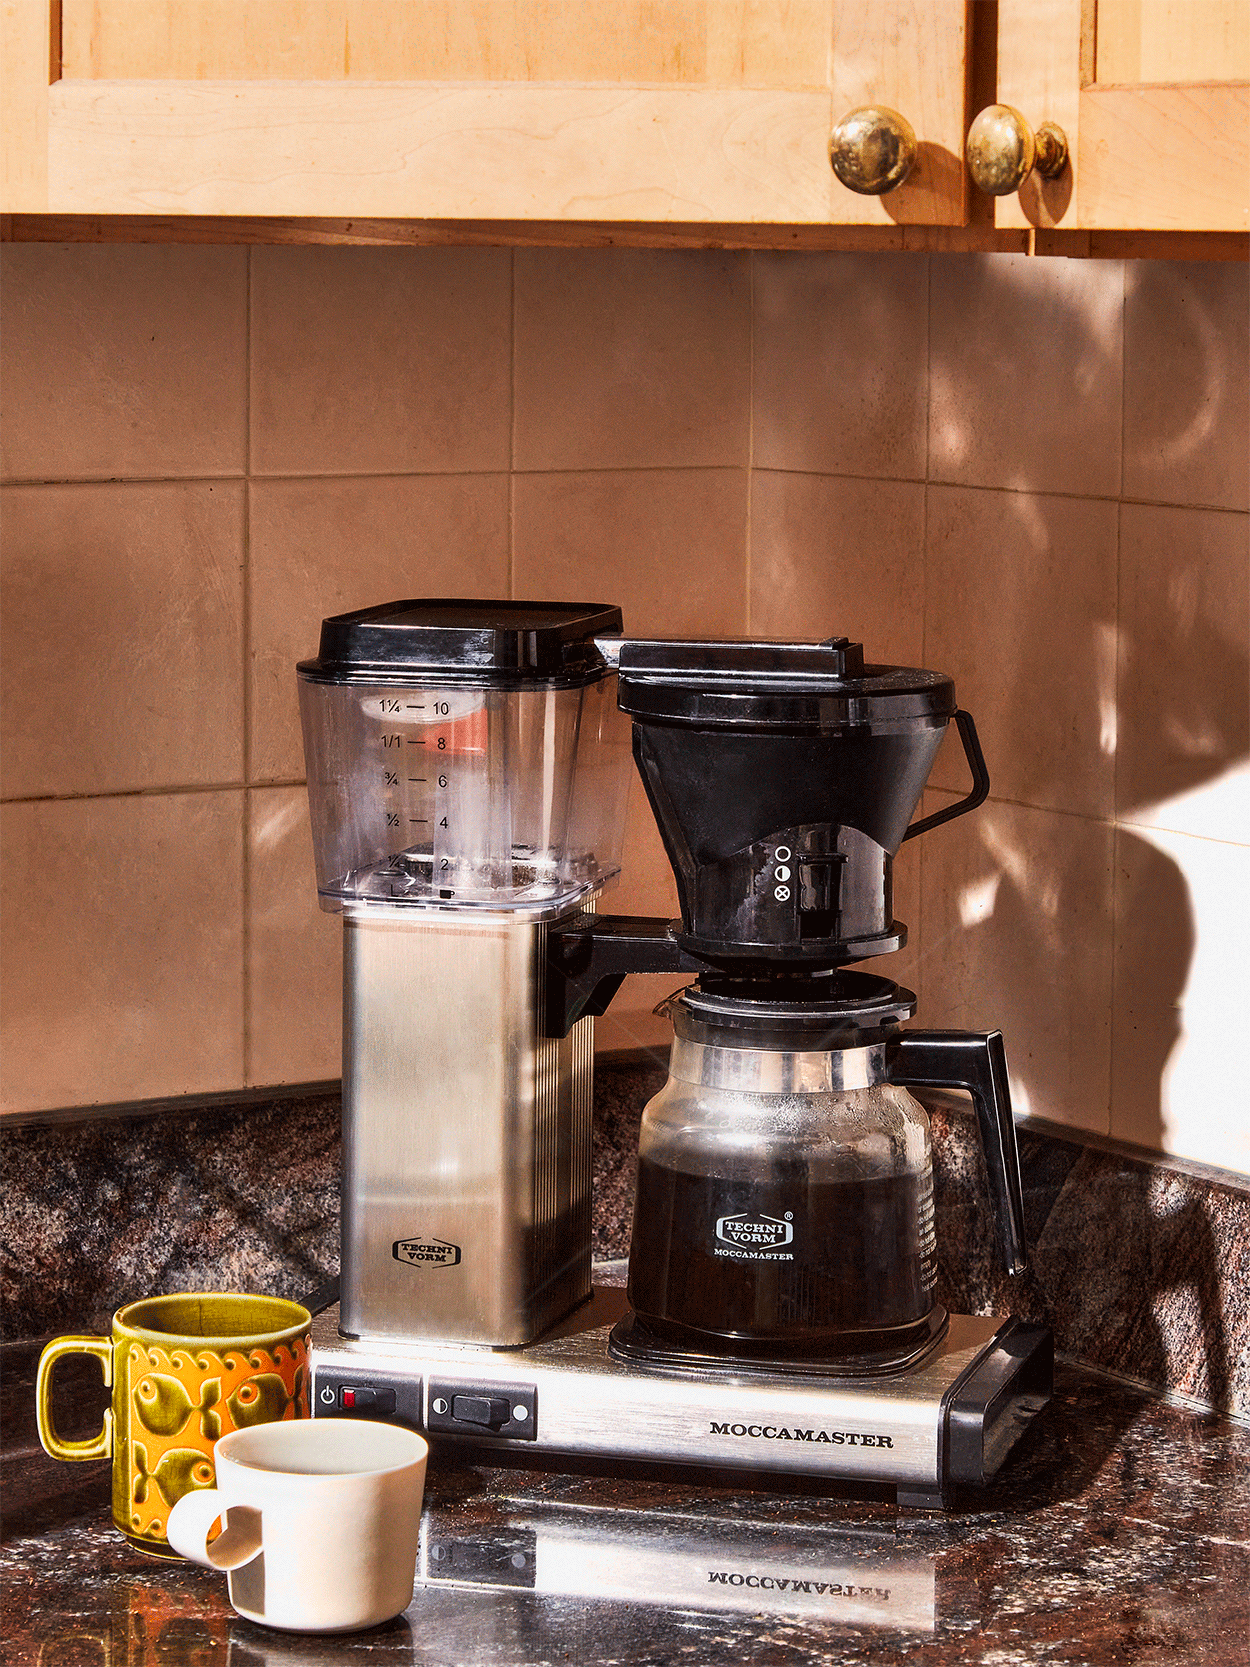 My Honest Review of the Most-Hyped Coffee Maker of All Time